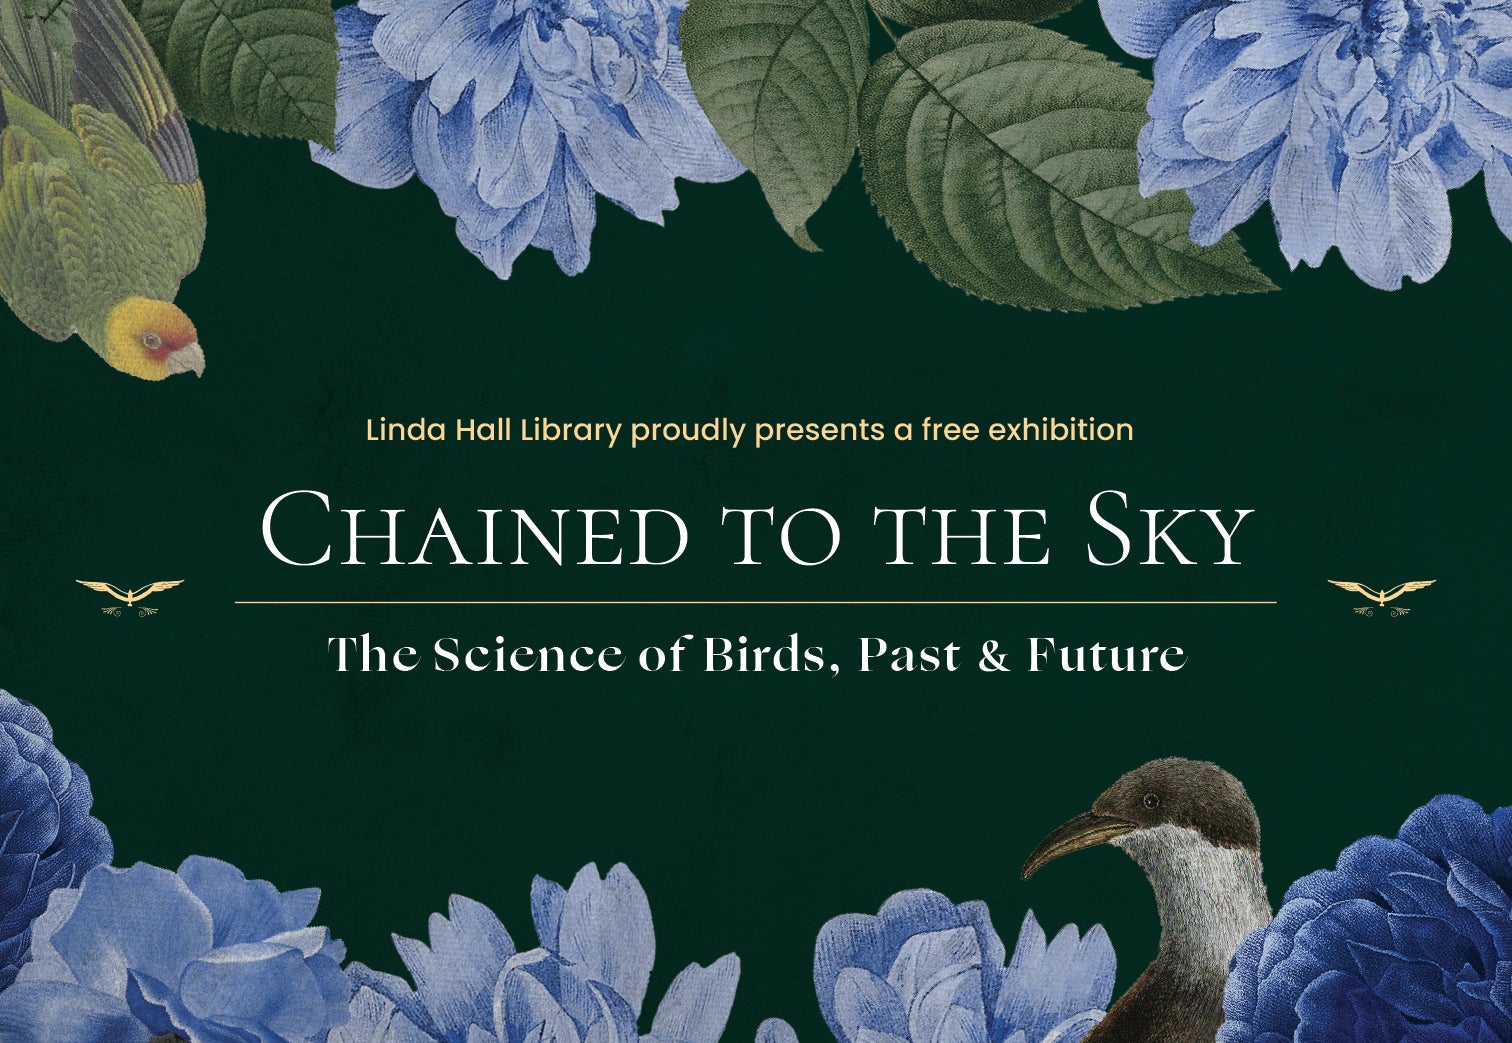 Chained to the Sky: The Science of Birds, Past & Future